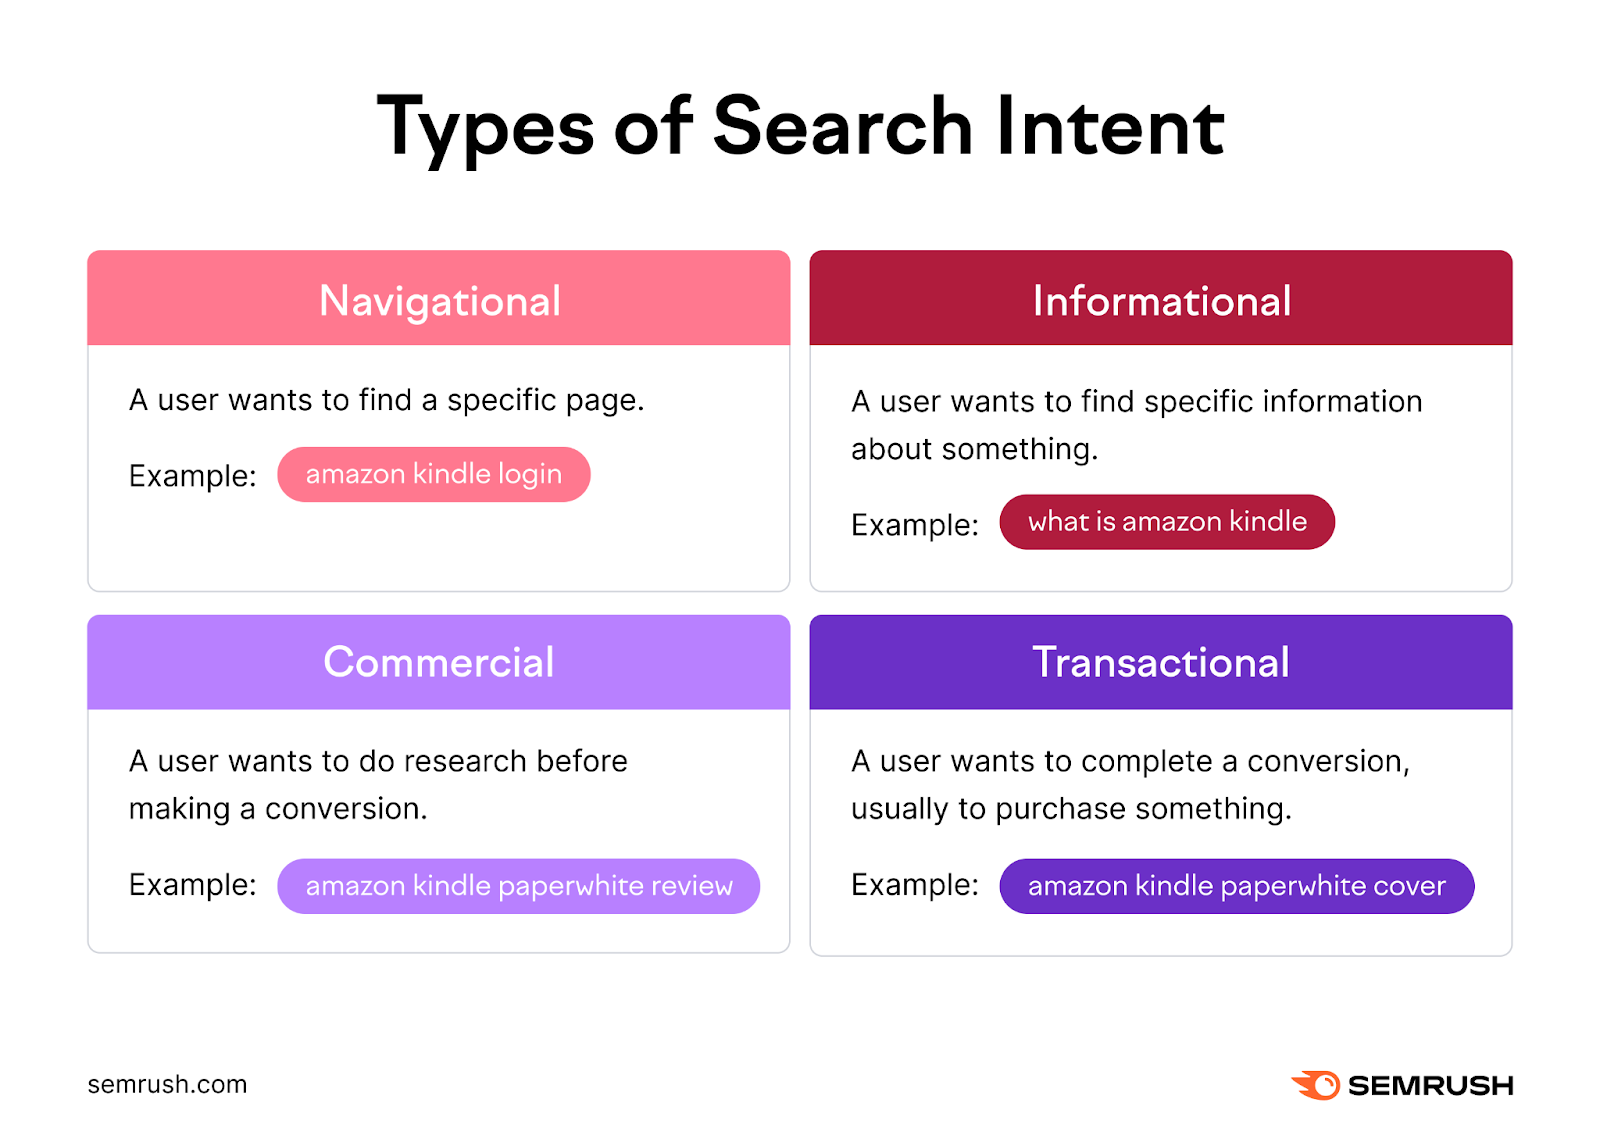 An image describing four types of search intent